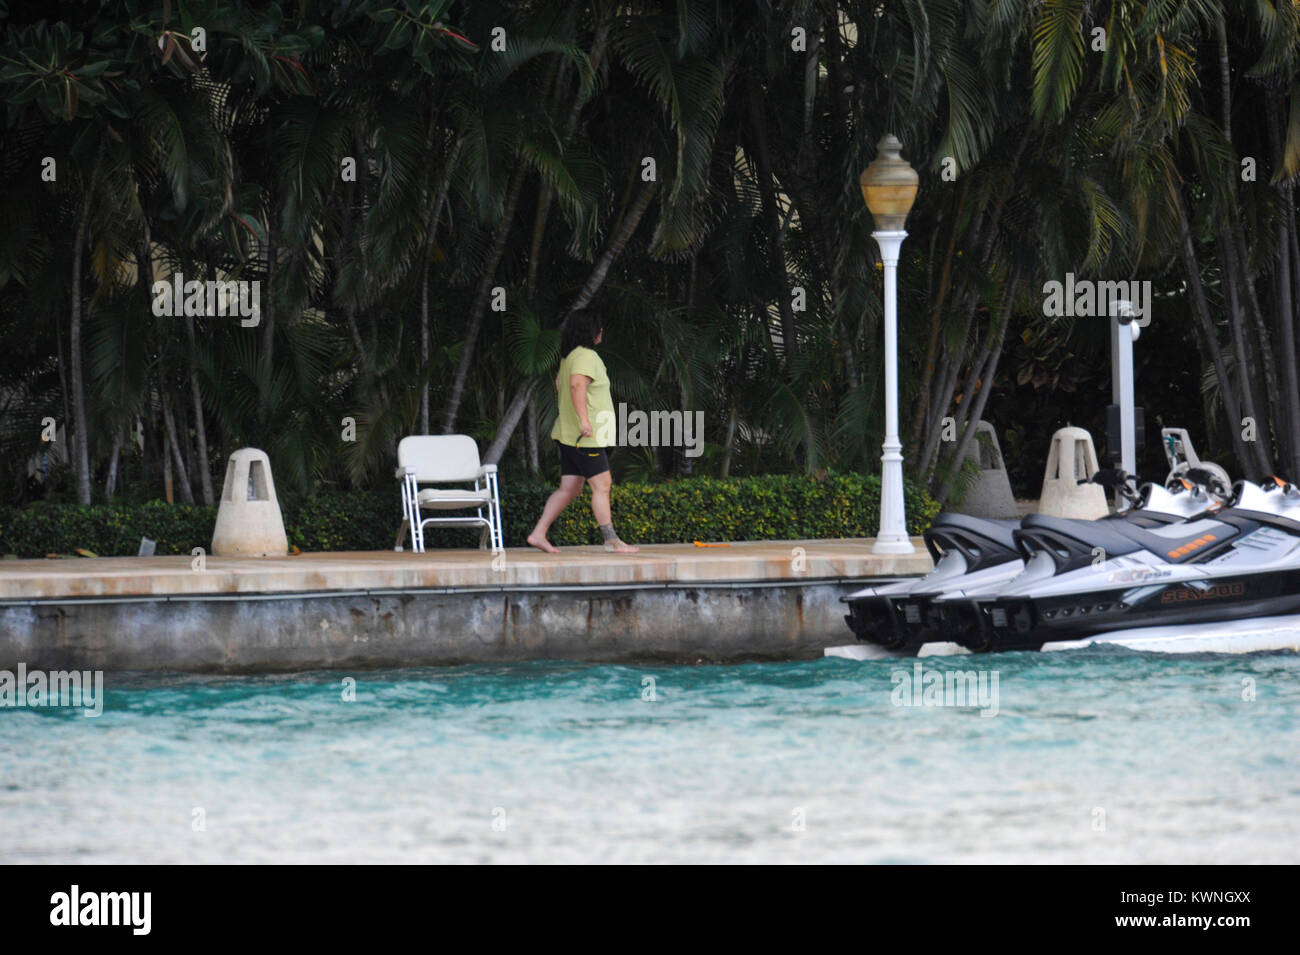 MIAMI BEACH, FL - JUNE 11:  (EXCLUSIVE COVERAGE) Rosie O'Donnell (wearing no make up and a bandage on her foot.)  Enjoys her day as she sits on her dock texting from her estate in Miami. Roseann "Rosie" O'Donnell (born March 21, 1962) is an American stand-up comedienne, actress, singer, author and media personality. She has also been a magazine editor and continues to be a celebrity blogger, LGBT rights activist; television producer and collaborative partner in the LGBT family vacation company R Family Vacations.   On June 11, 2011 in Miami Beach, Florida    People:  Rosie O'Donnell Stock Photo